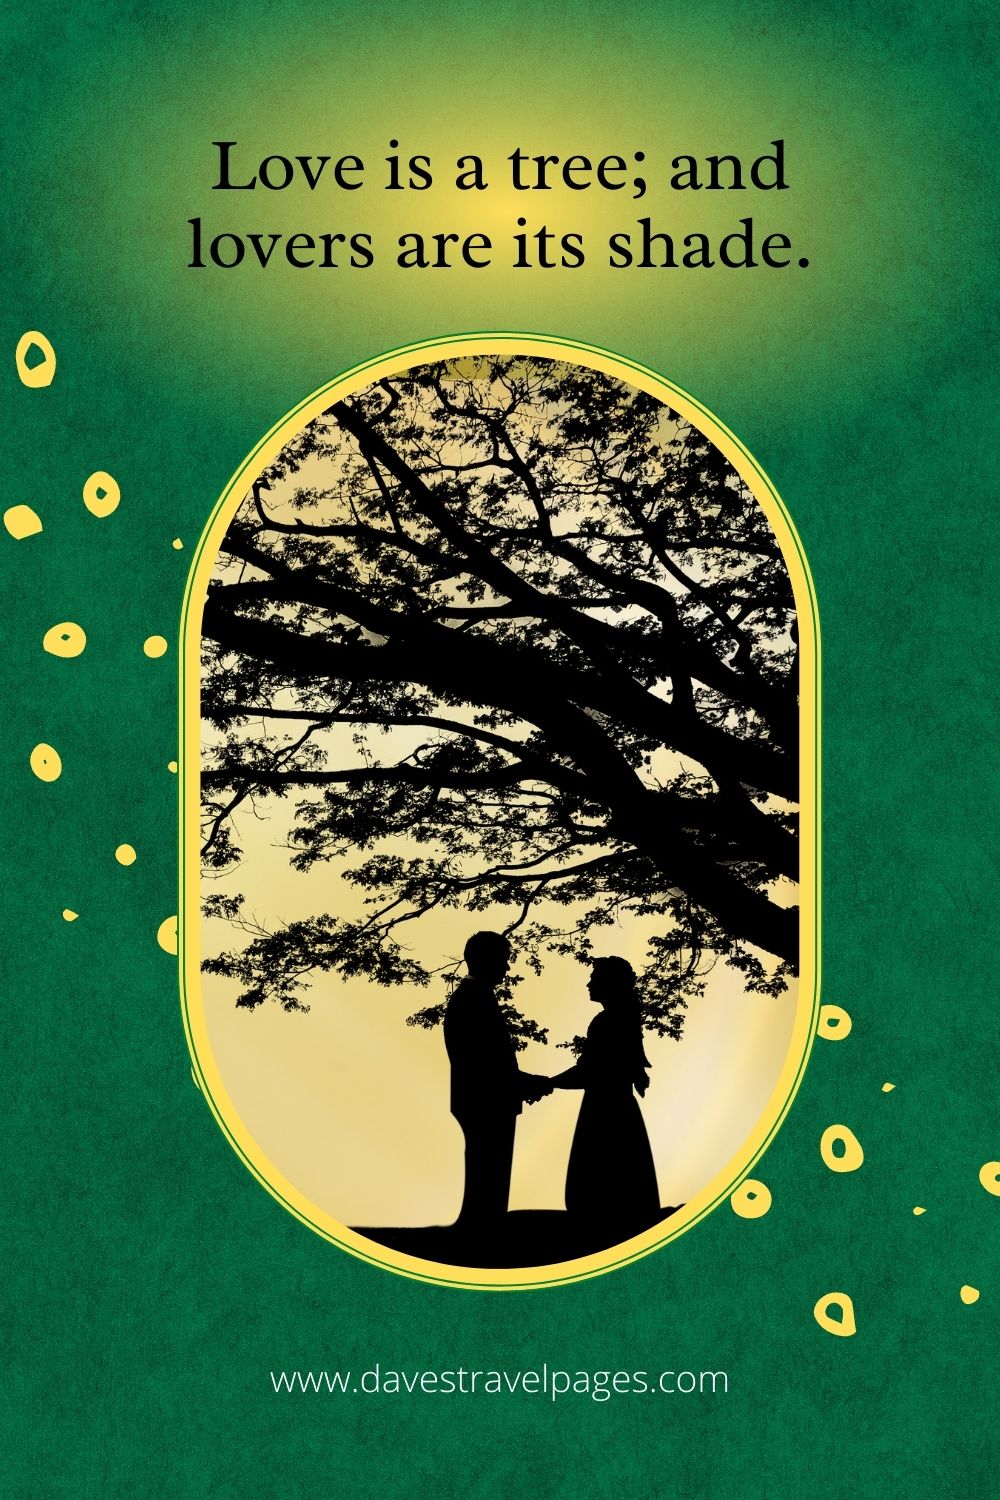 Love is a tree; and lovers are its shade.